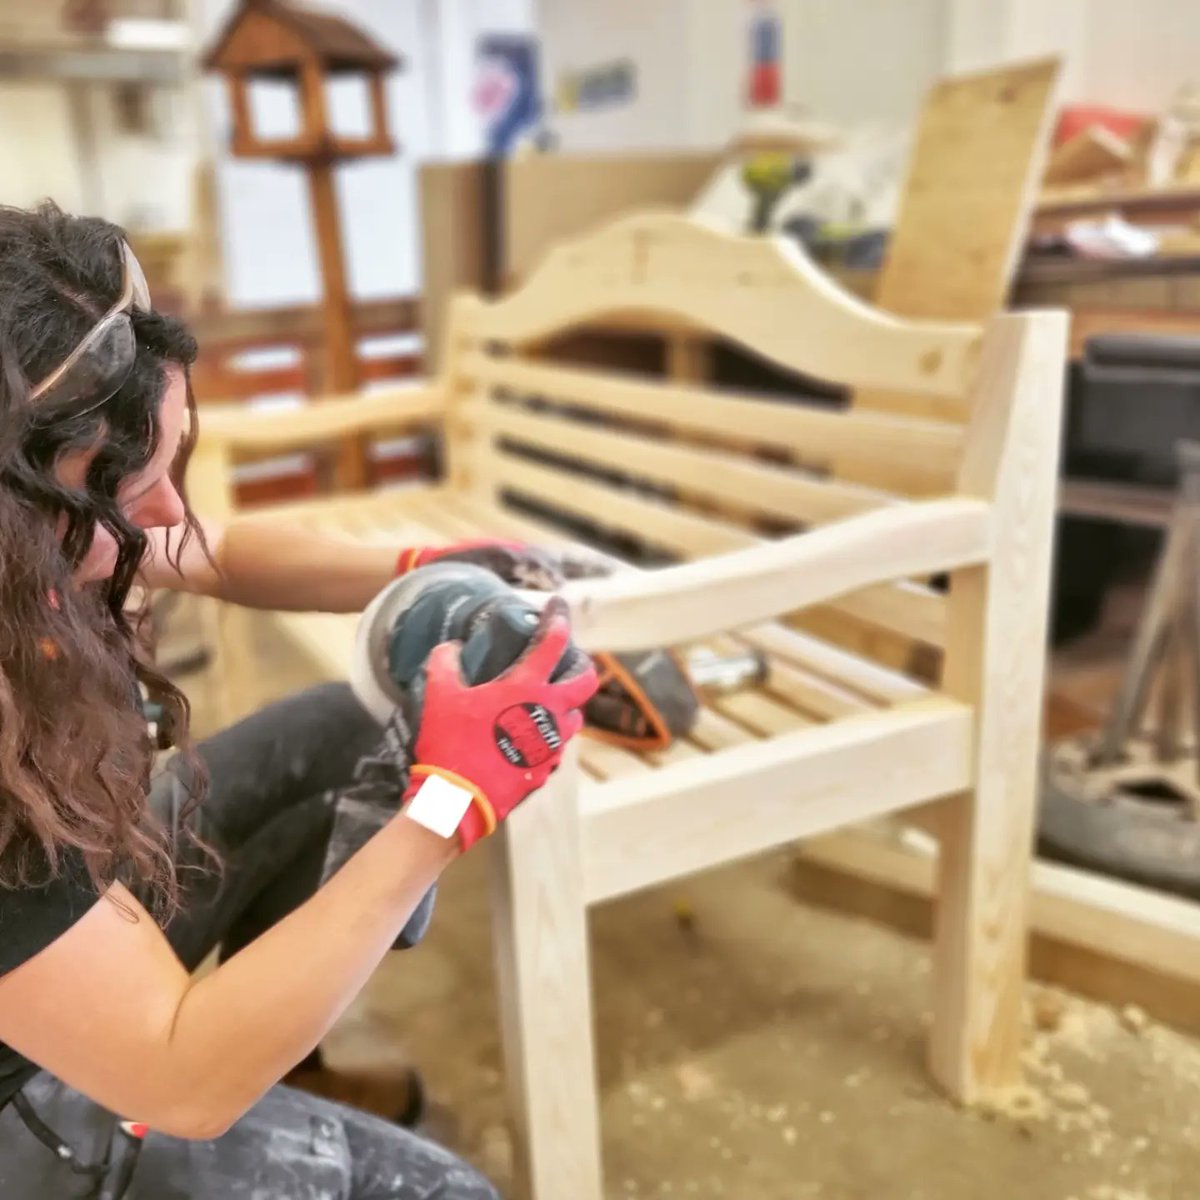 Fancy working for a sparkling, award winning #socialenterprise in #Oxford? We're recruiting woodworker/bench-joiner/carpenter type. Give us a shout - Deets on the gig here: tinyurl.com/4ktwjp2d #jobs #oxfordshire #woodwork #furniture #socent #Sustainability #socialvalue